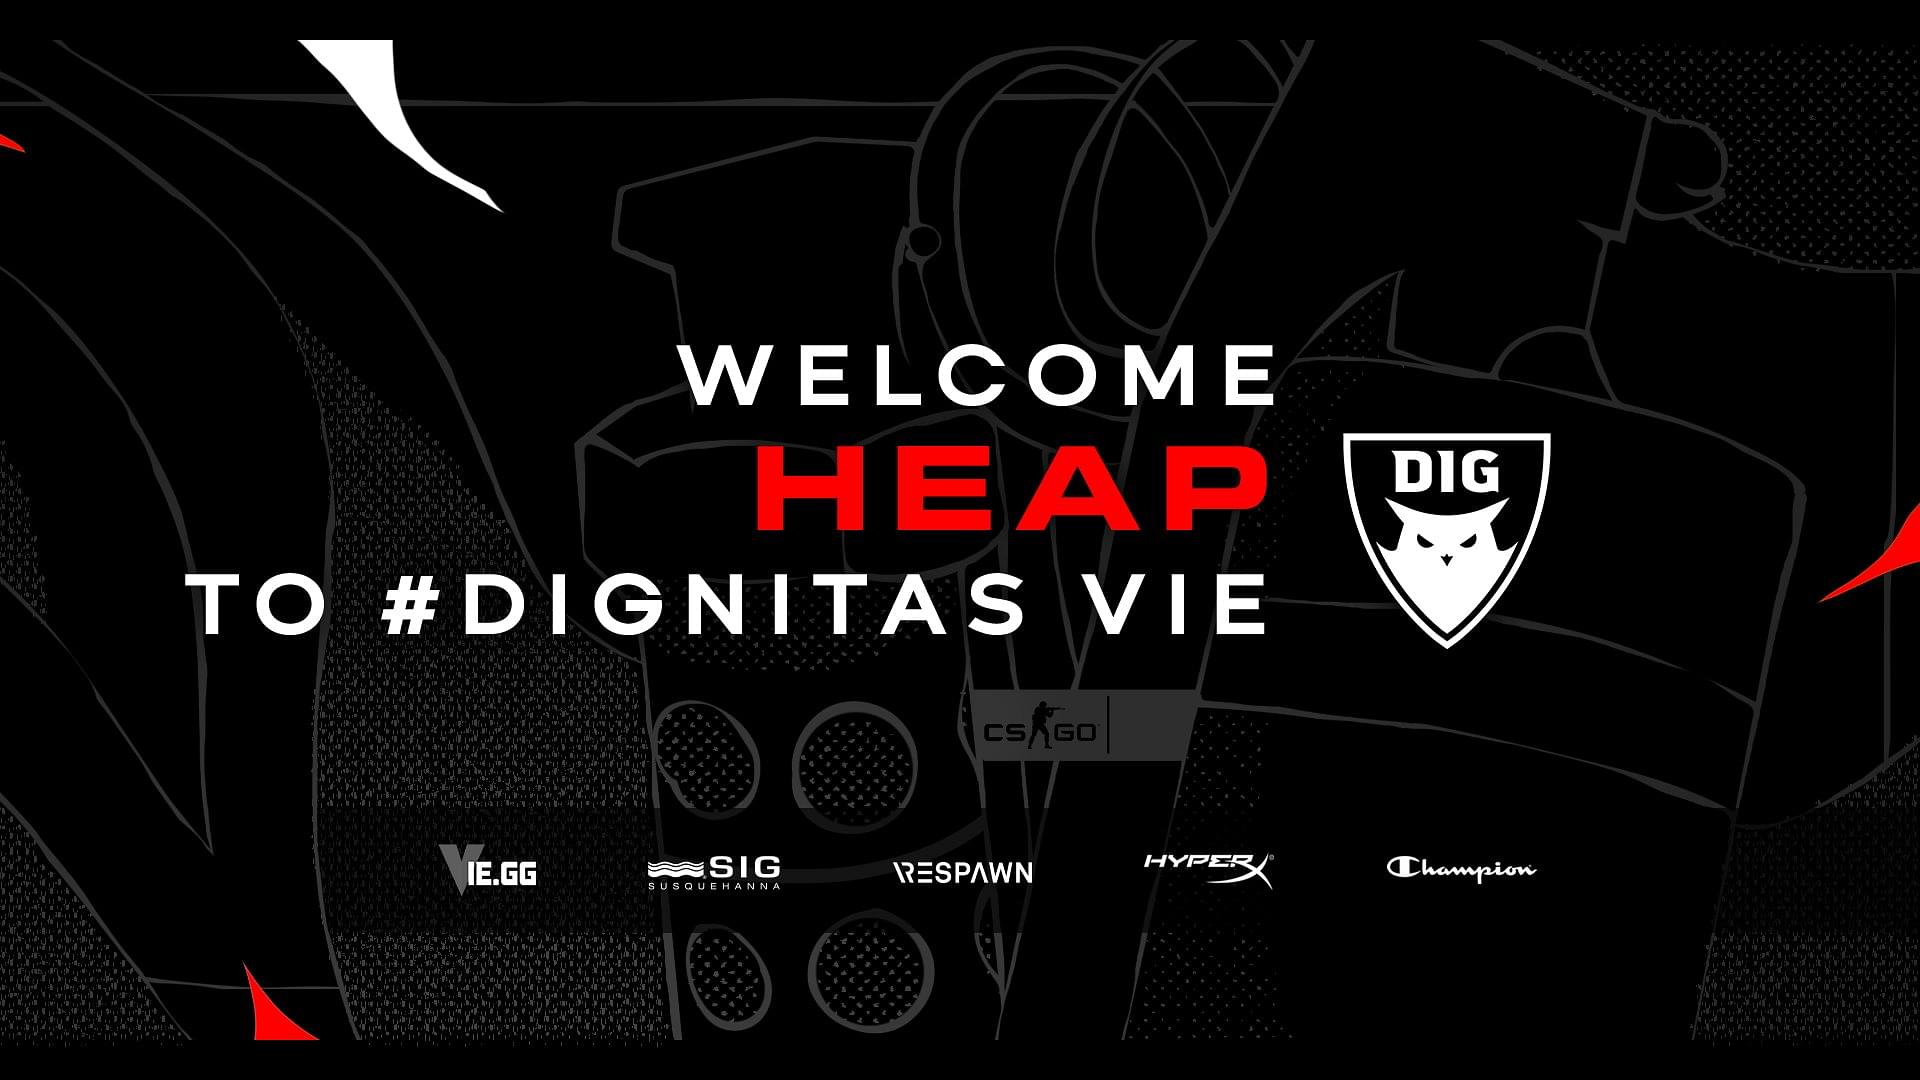 Dignitas have announced the signing of Swedish player HEAP